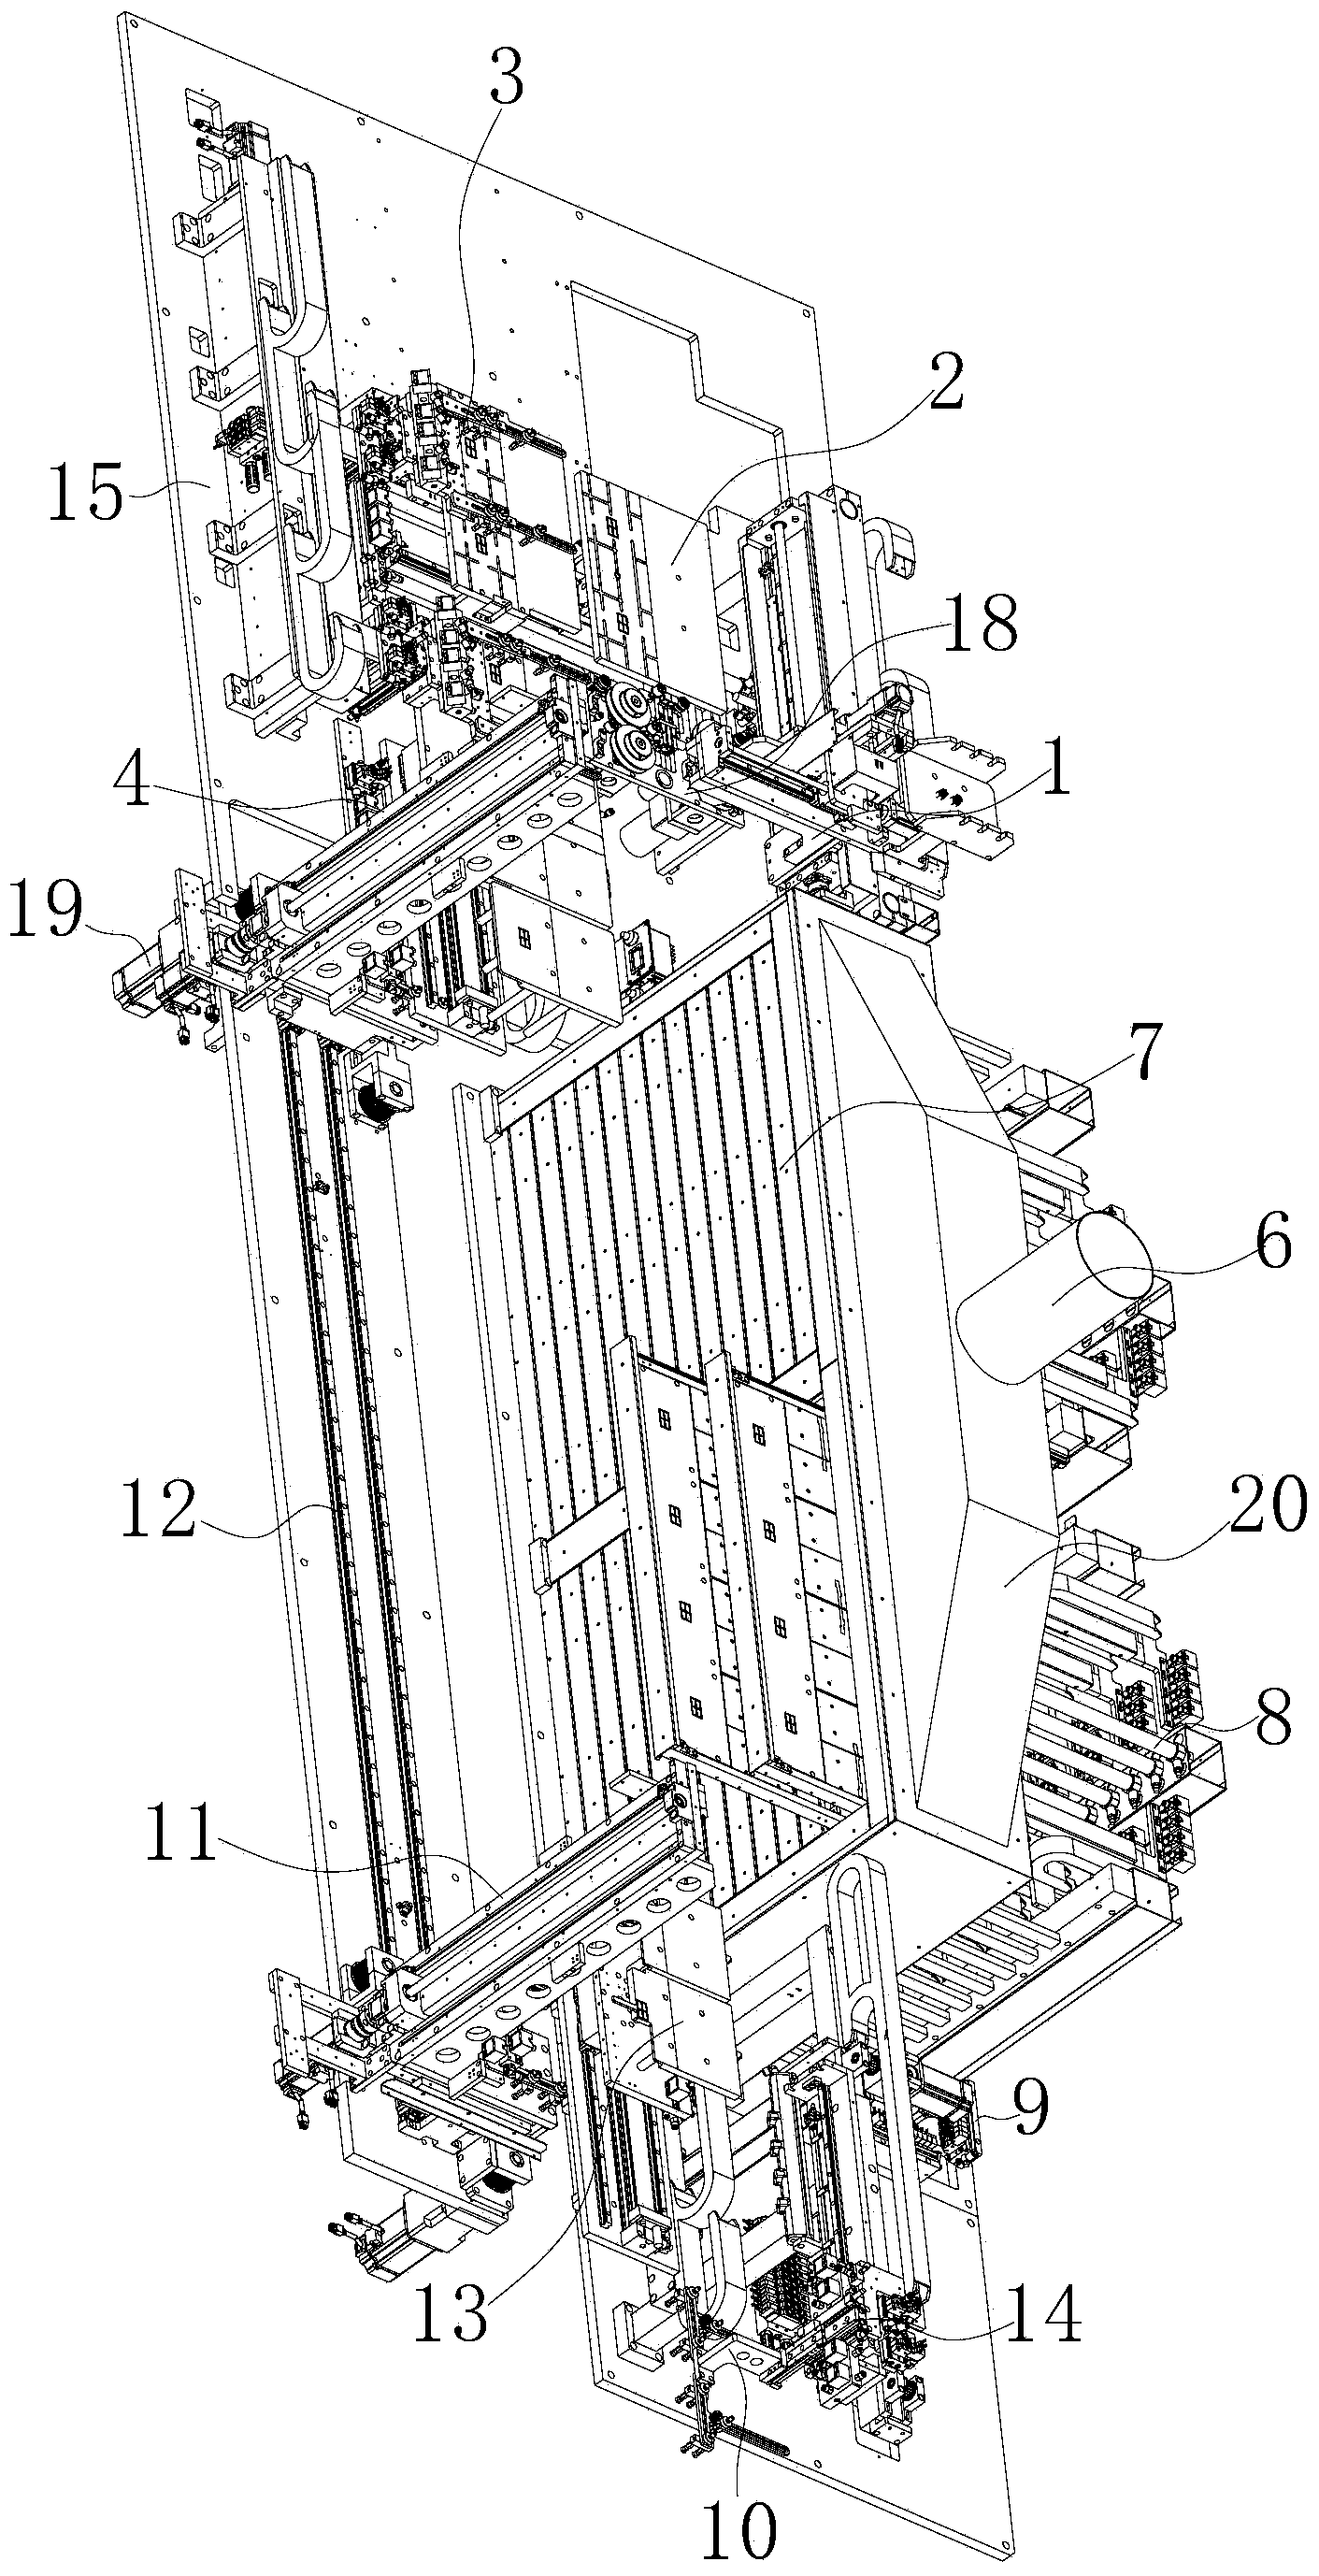 Multi-layer baking solidification dispensing machine achieving automatic feeding and discharging